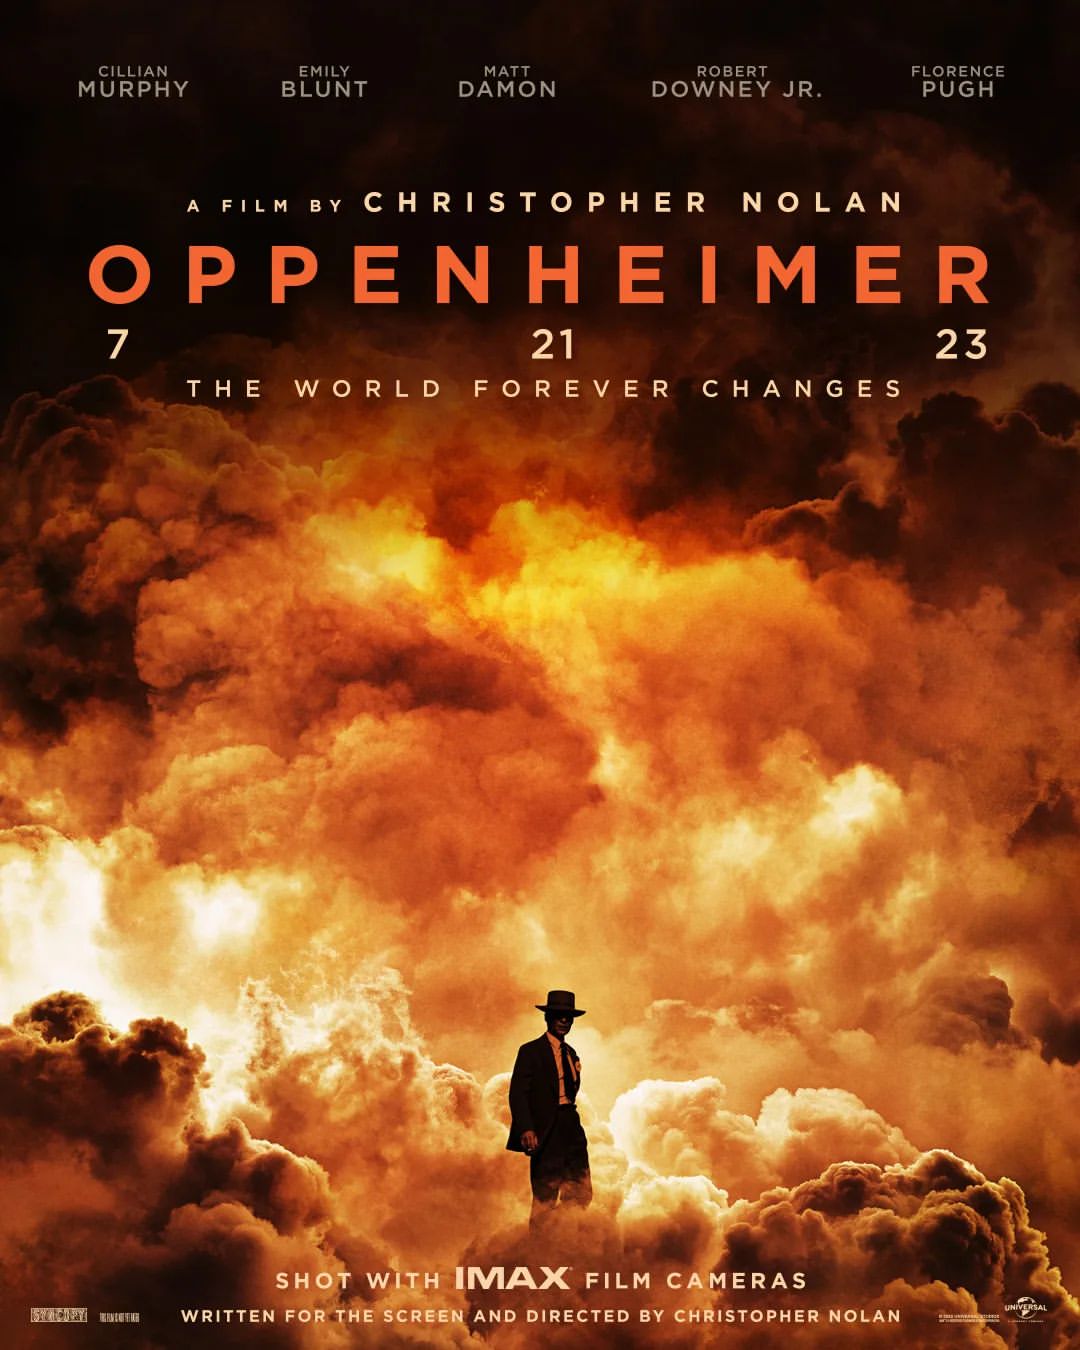 Oppenheimer, which grossed over 950 million U.S. dollars worldwide, making it the highest-grossing film of Christopher Nolan's career and the third-highest-grossing film of 2023